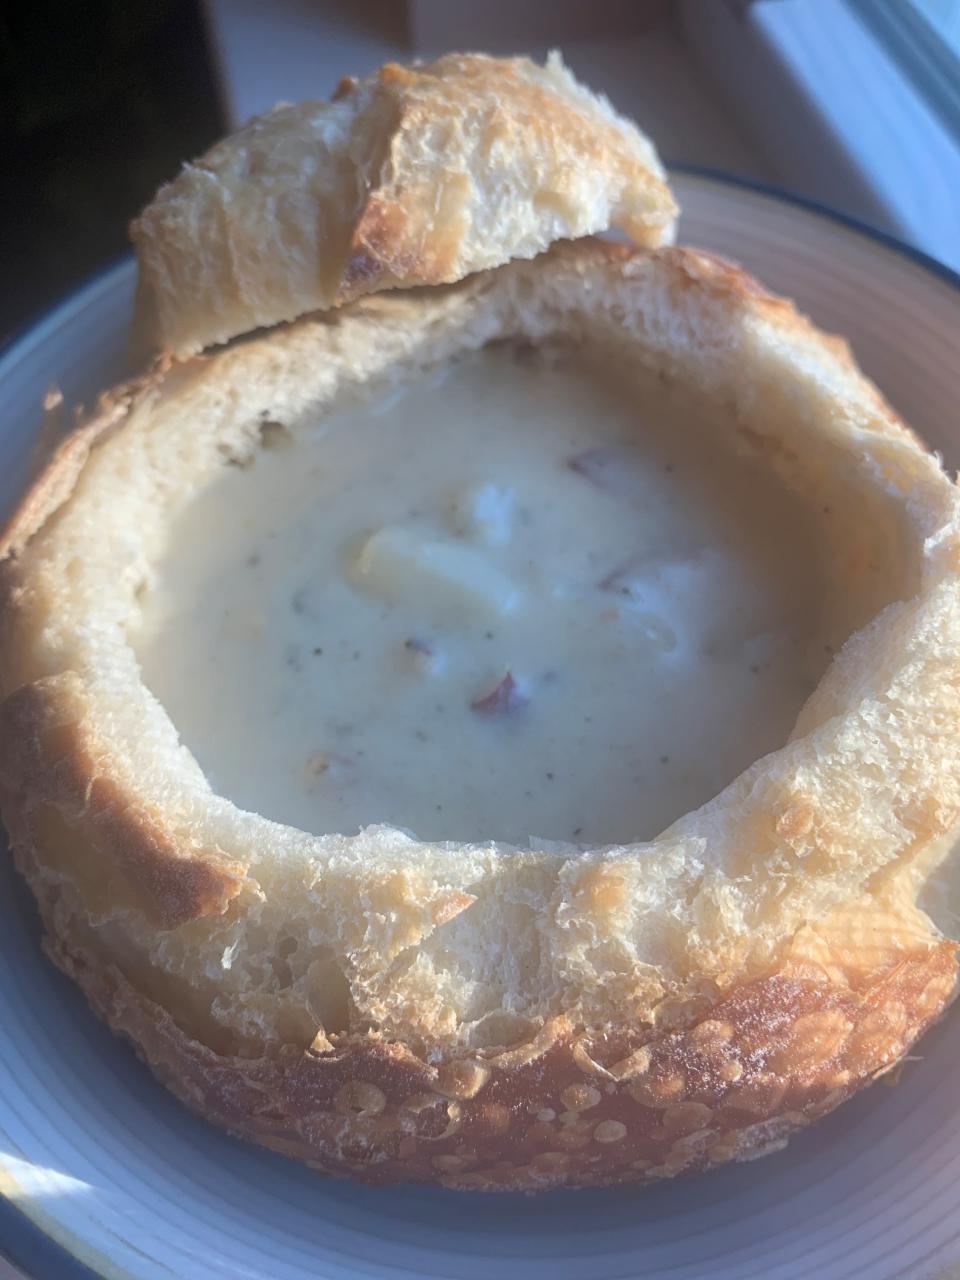 New England clam chowder from Country Kettle Chowda in Beach Haven.